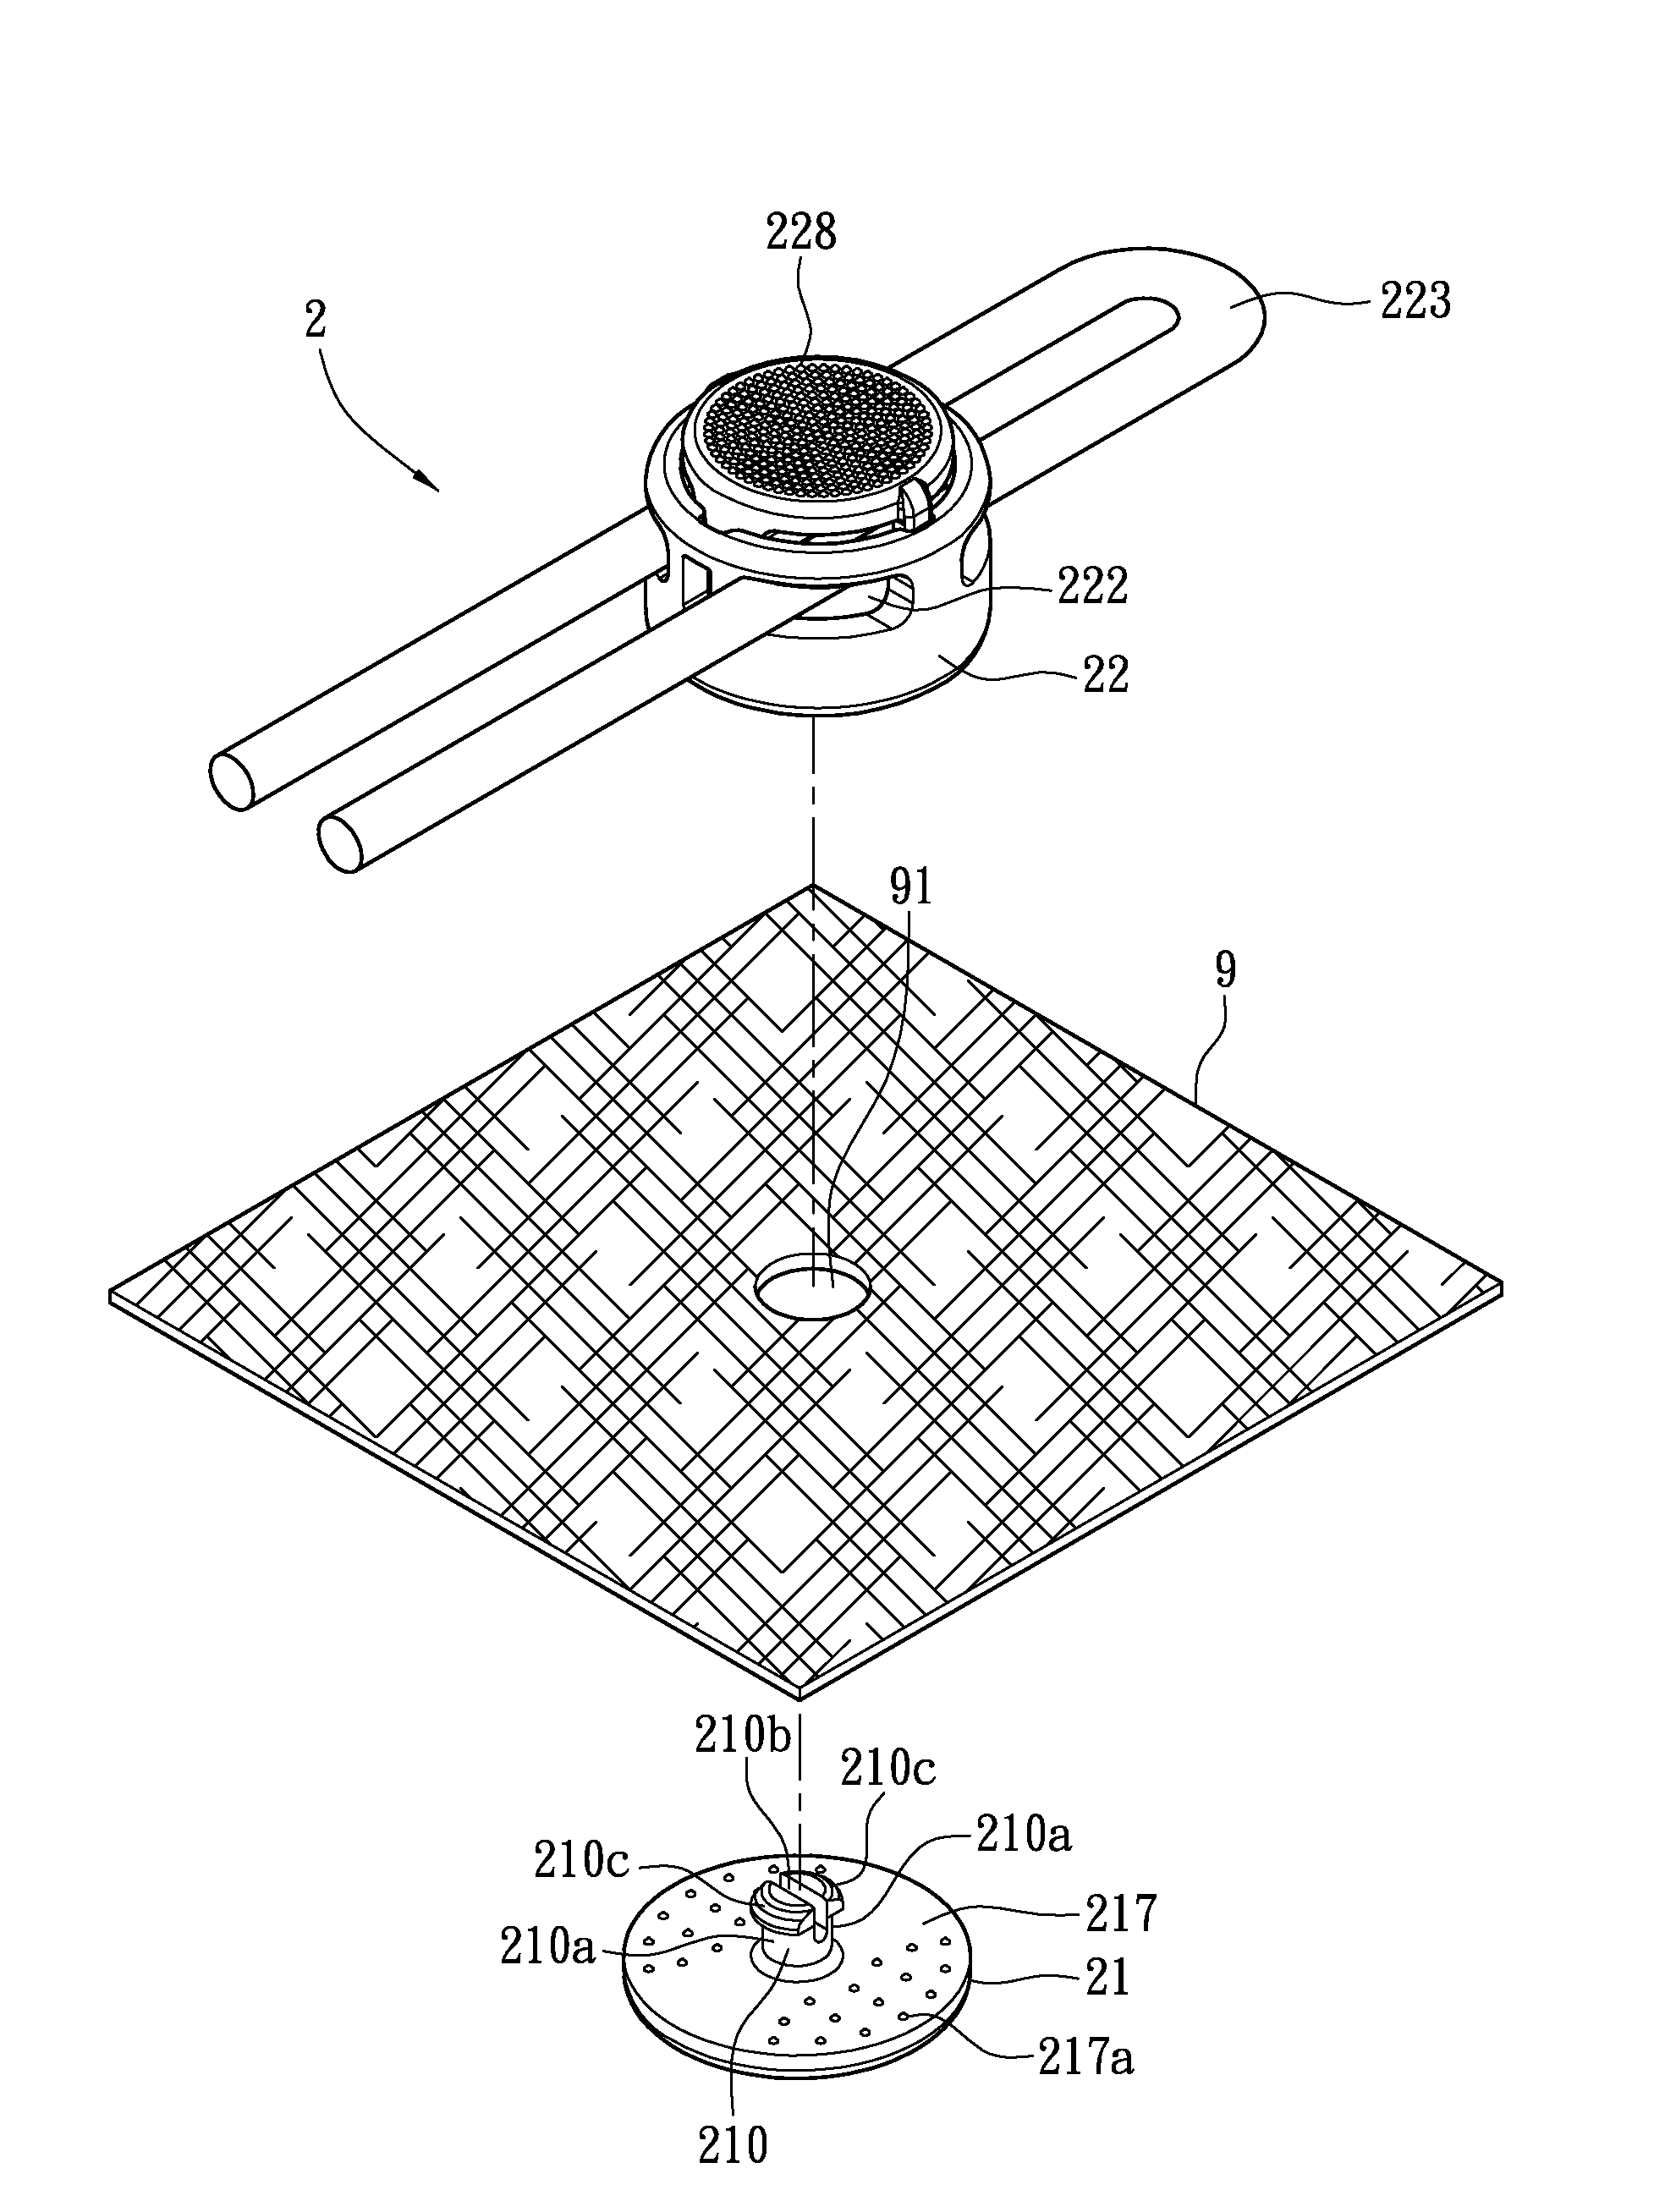 Method for fastening a cord lock device on a fabric